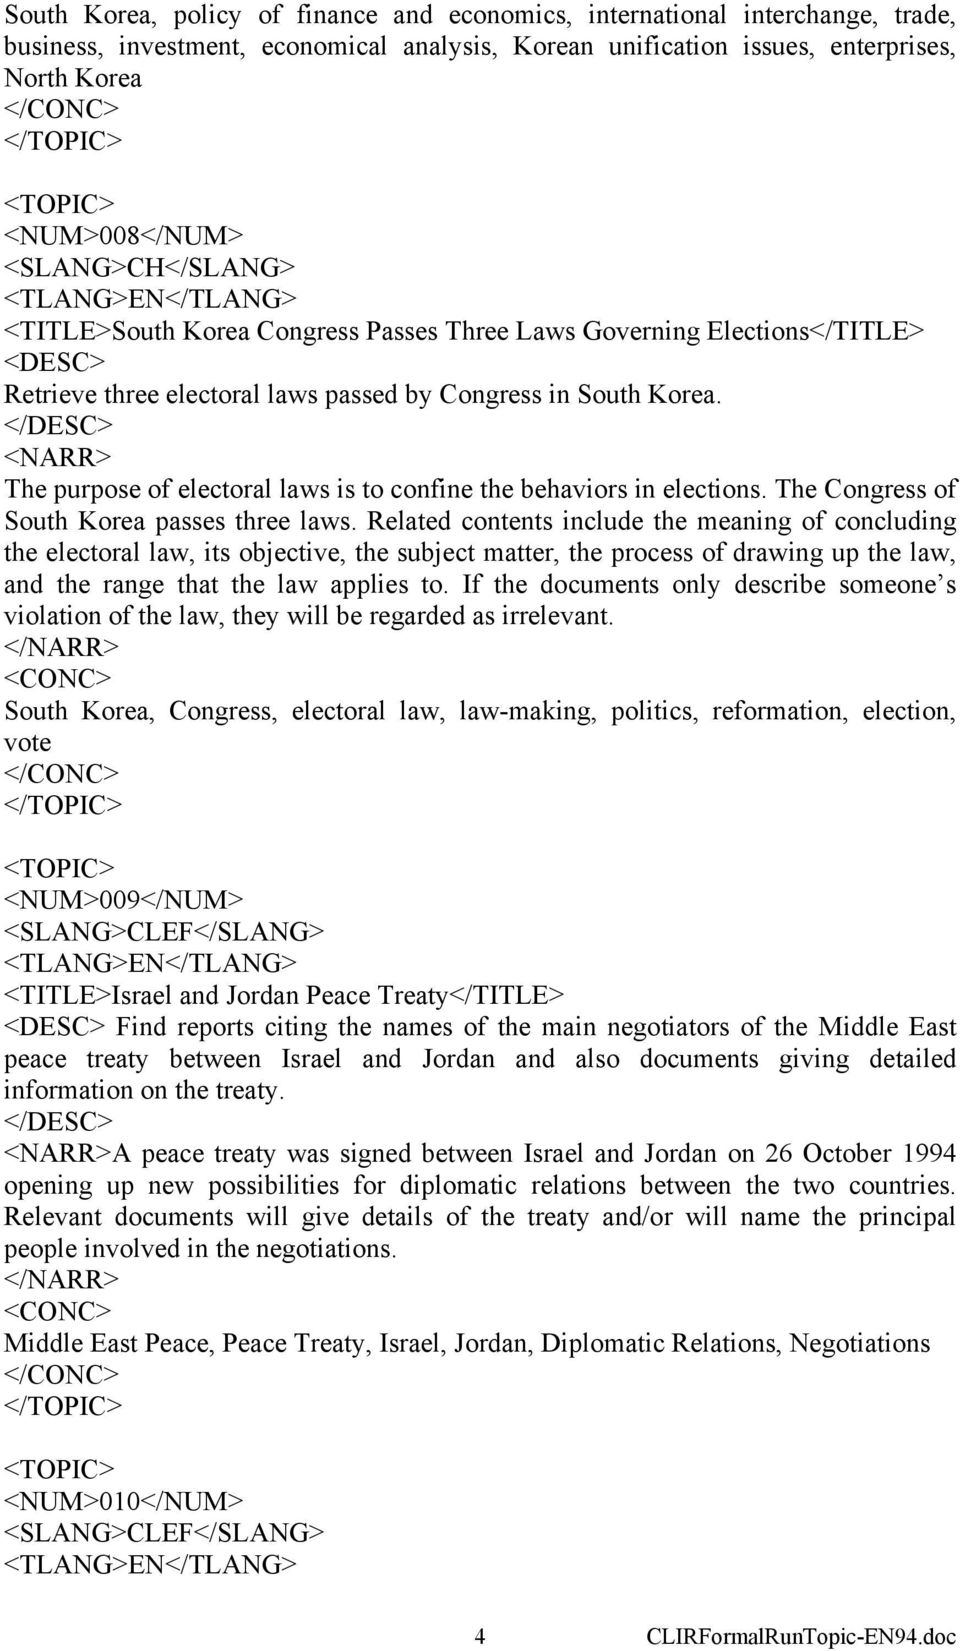 The purpose of electoral laws is to confine the behaviors in elections. The Congress of South Korea passes three laws.